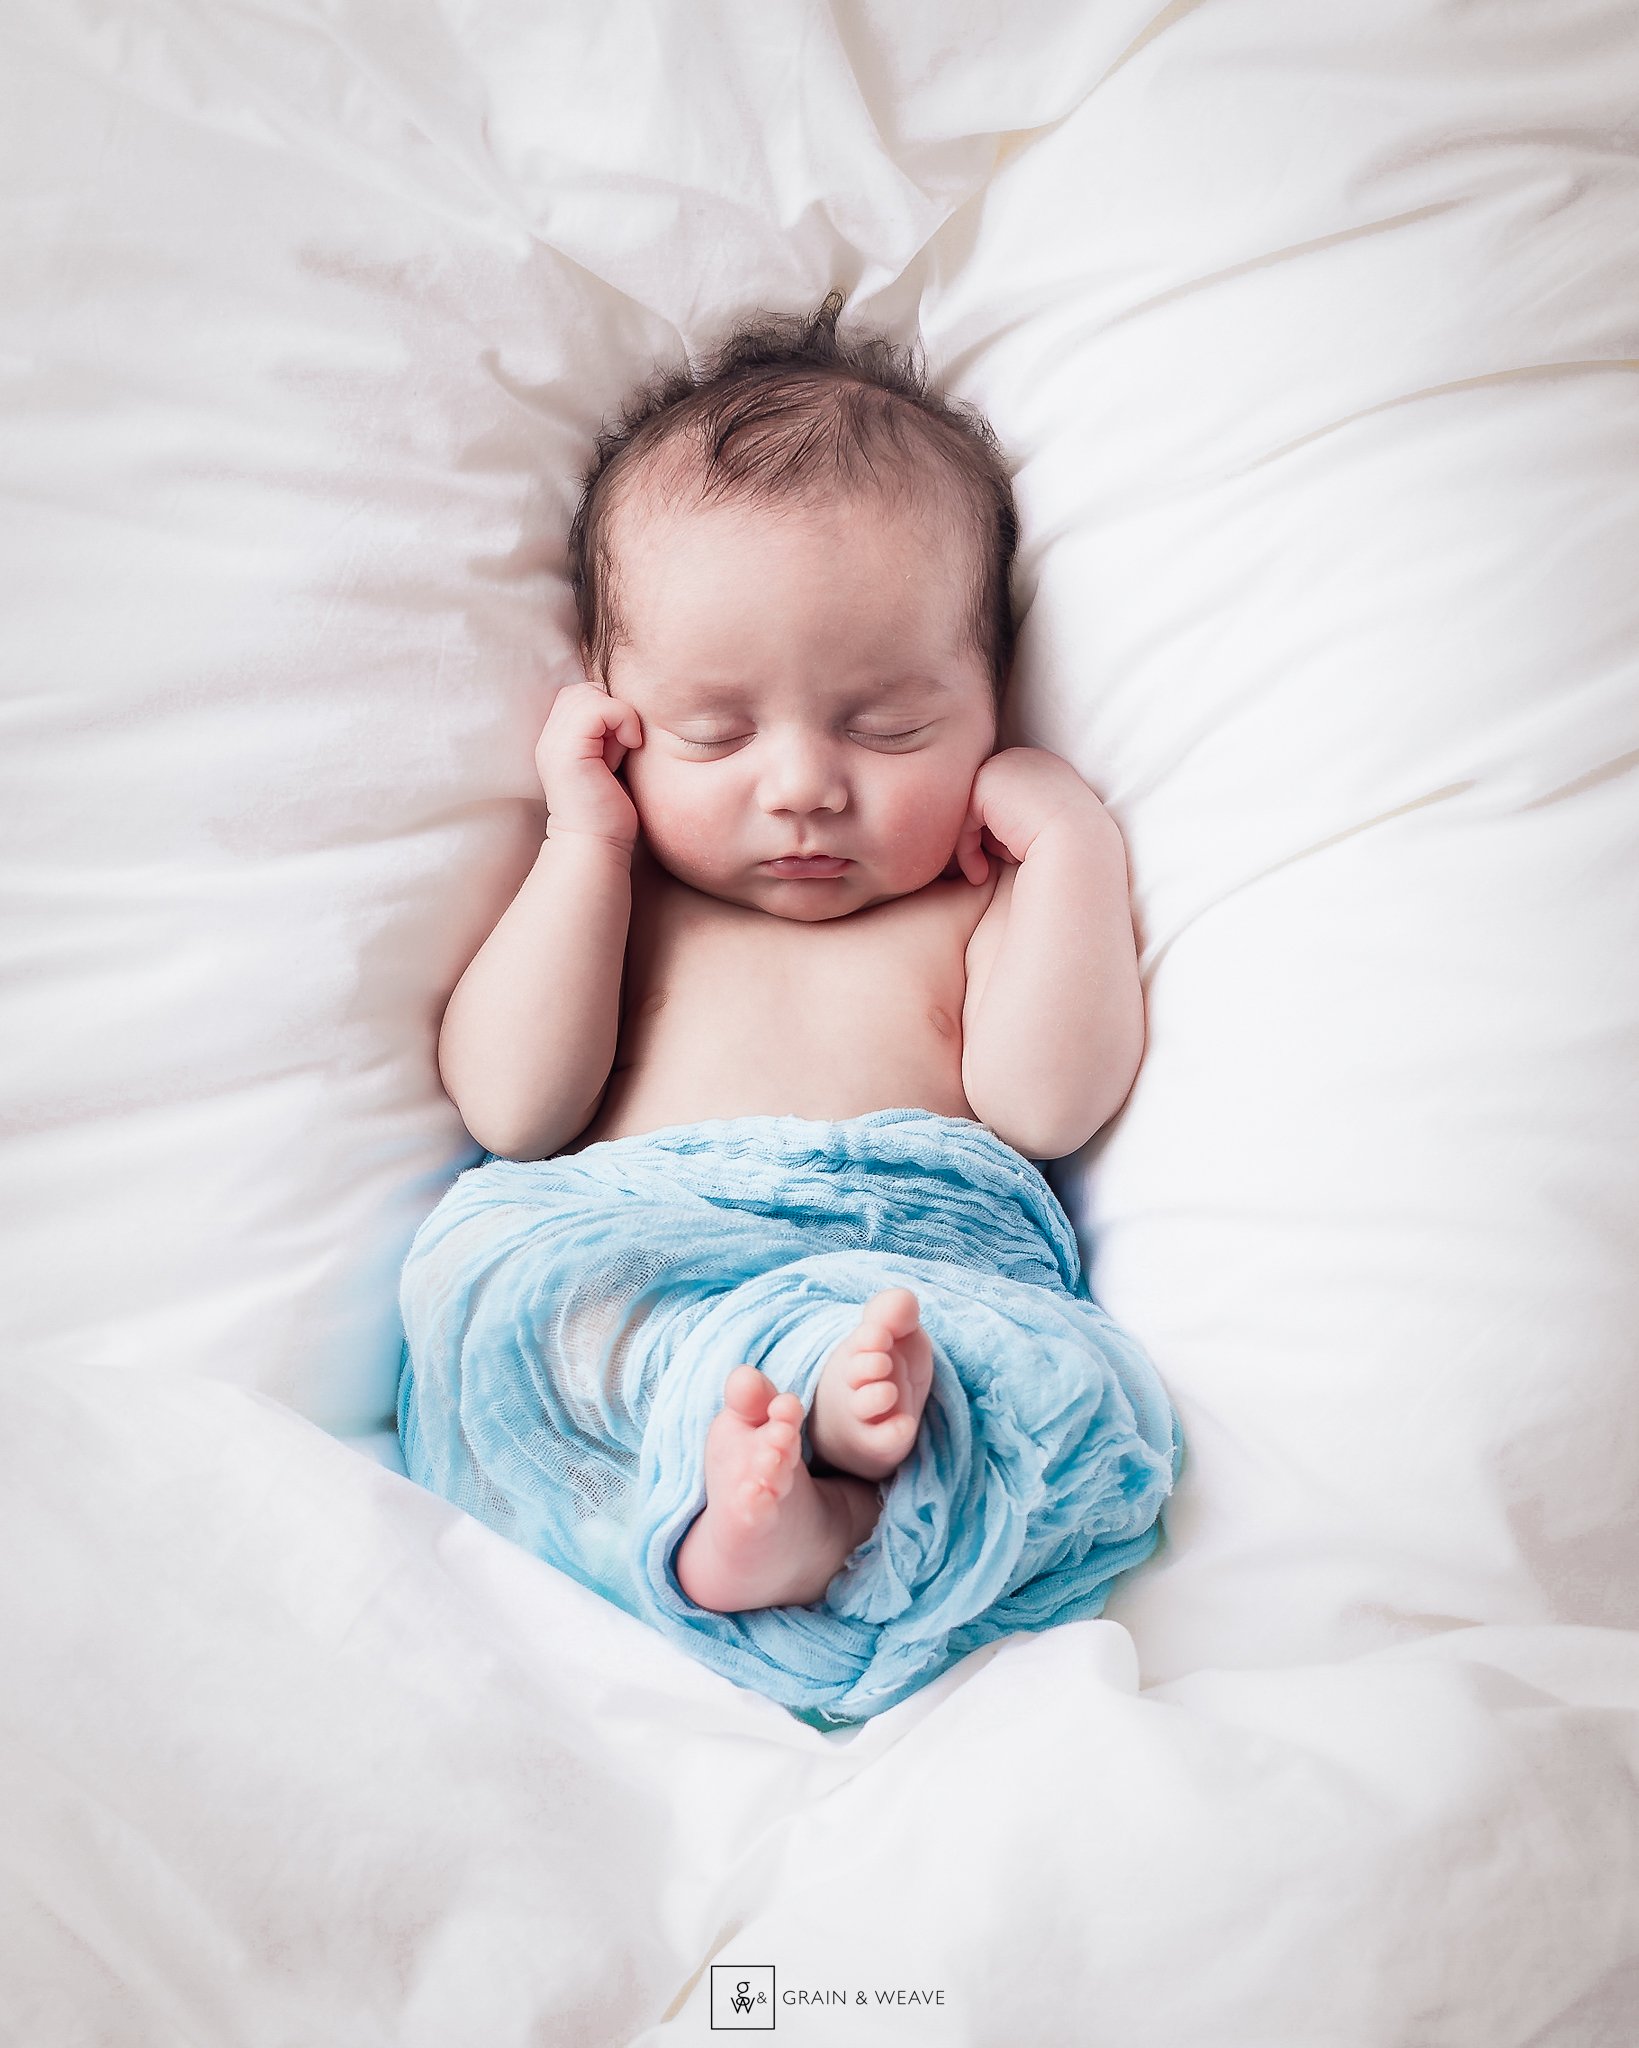 Newborn Baby Photography Captured at Home in Sydney